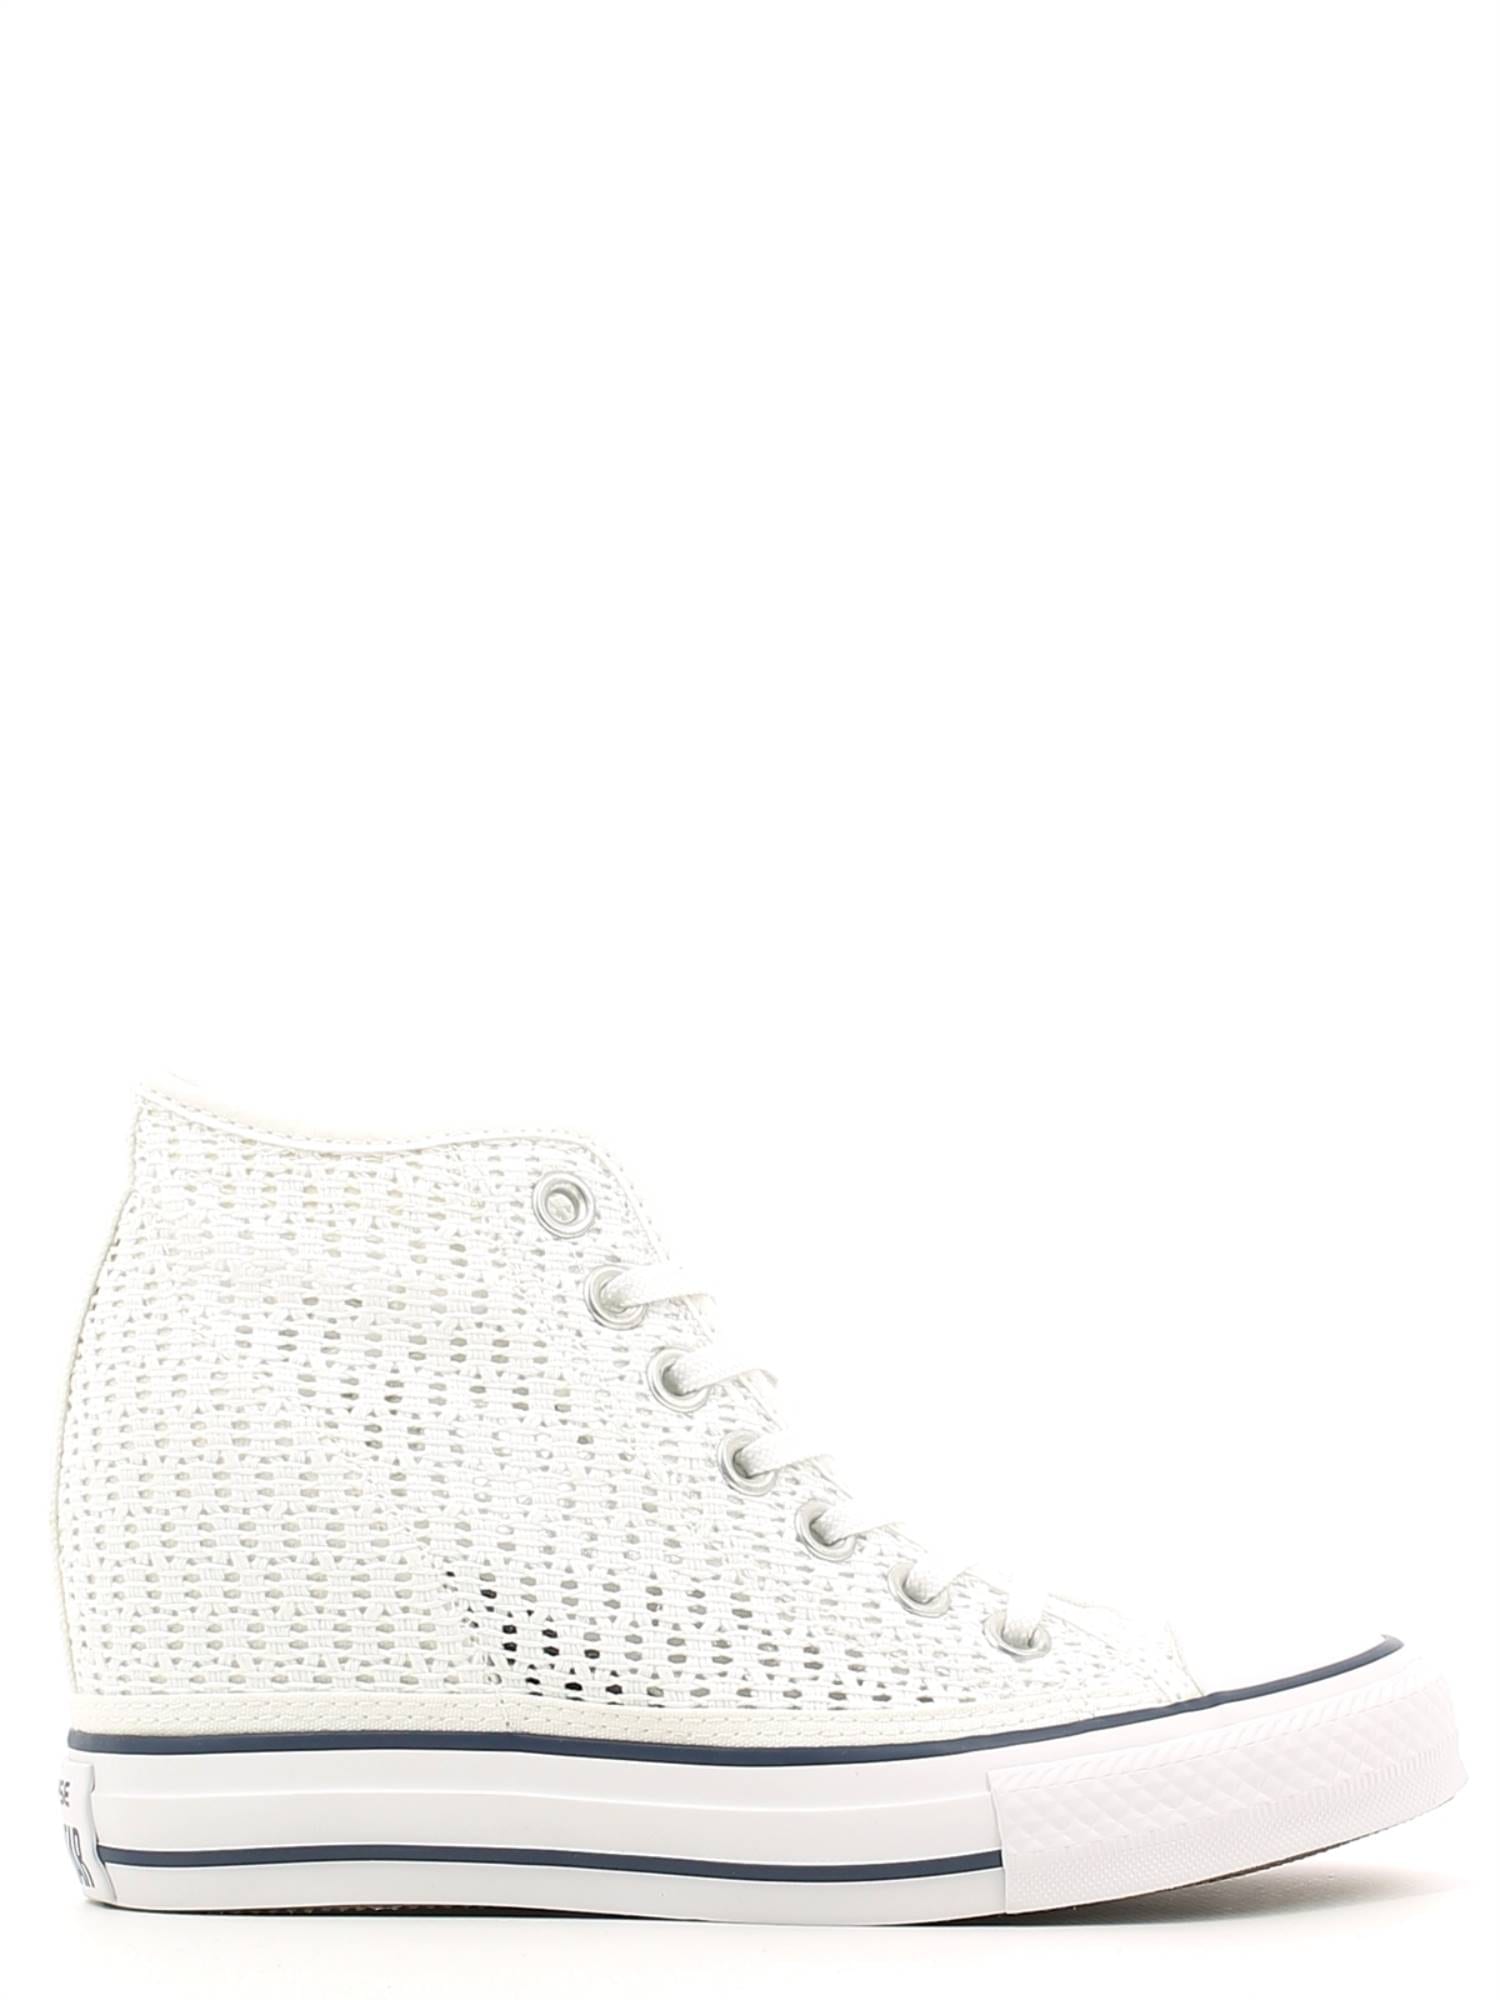 converse all star mid lux crochet